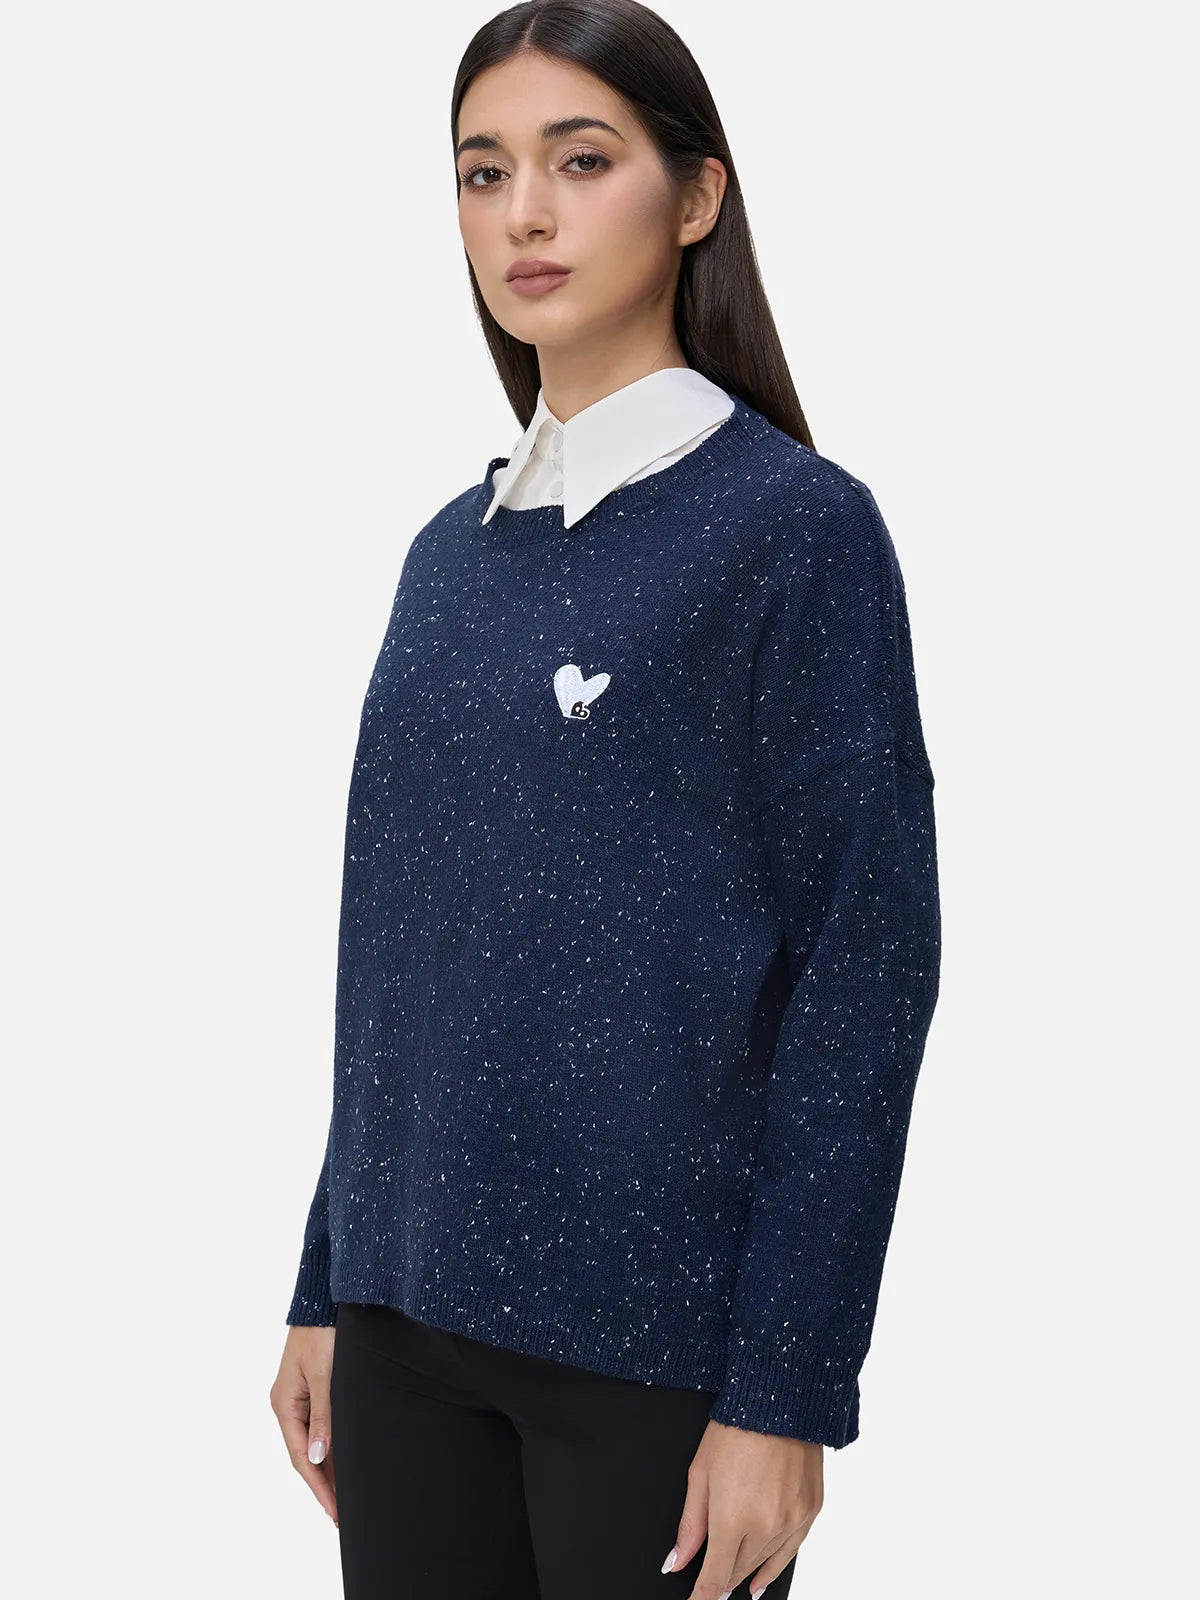 Elevate your casual wardrobe with this adorable navy sweater set, featuring a heart-shaped print on the navy sweater for a touch of sweetness and a tailored fit for casual elegance.